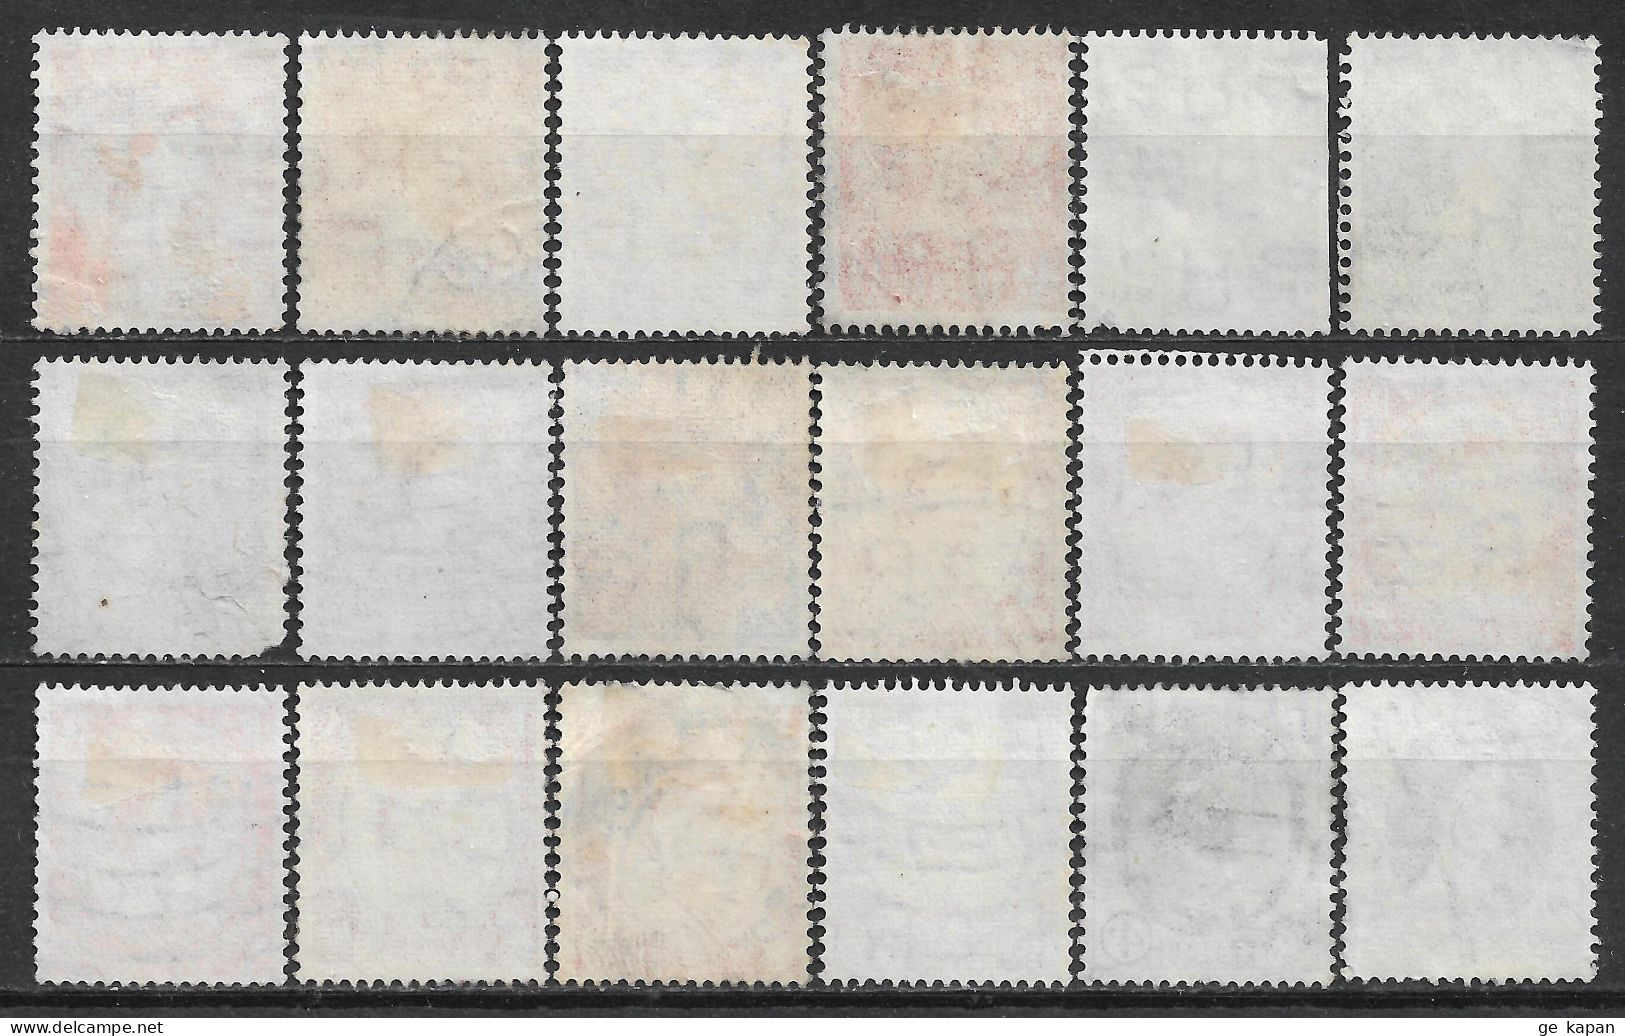 1952-1953 GREAT BRITAIN Set Of 18 USED STAMPS (Scott # 292,294-298,306) CV $5.60 - Used Stamps